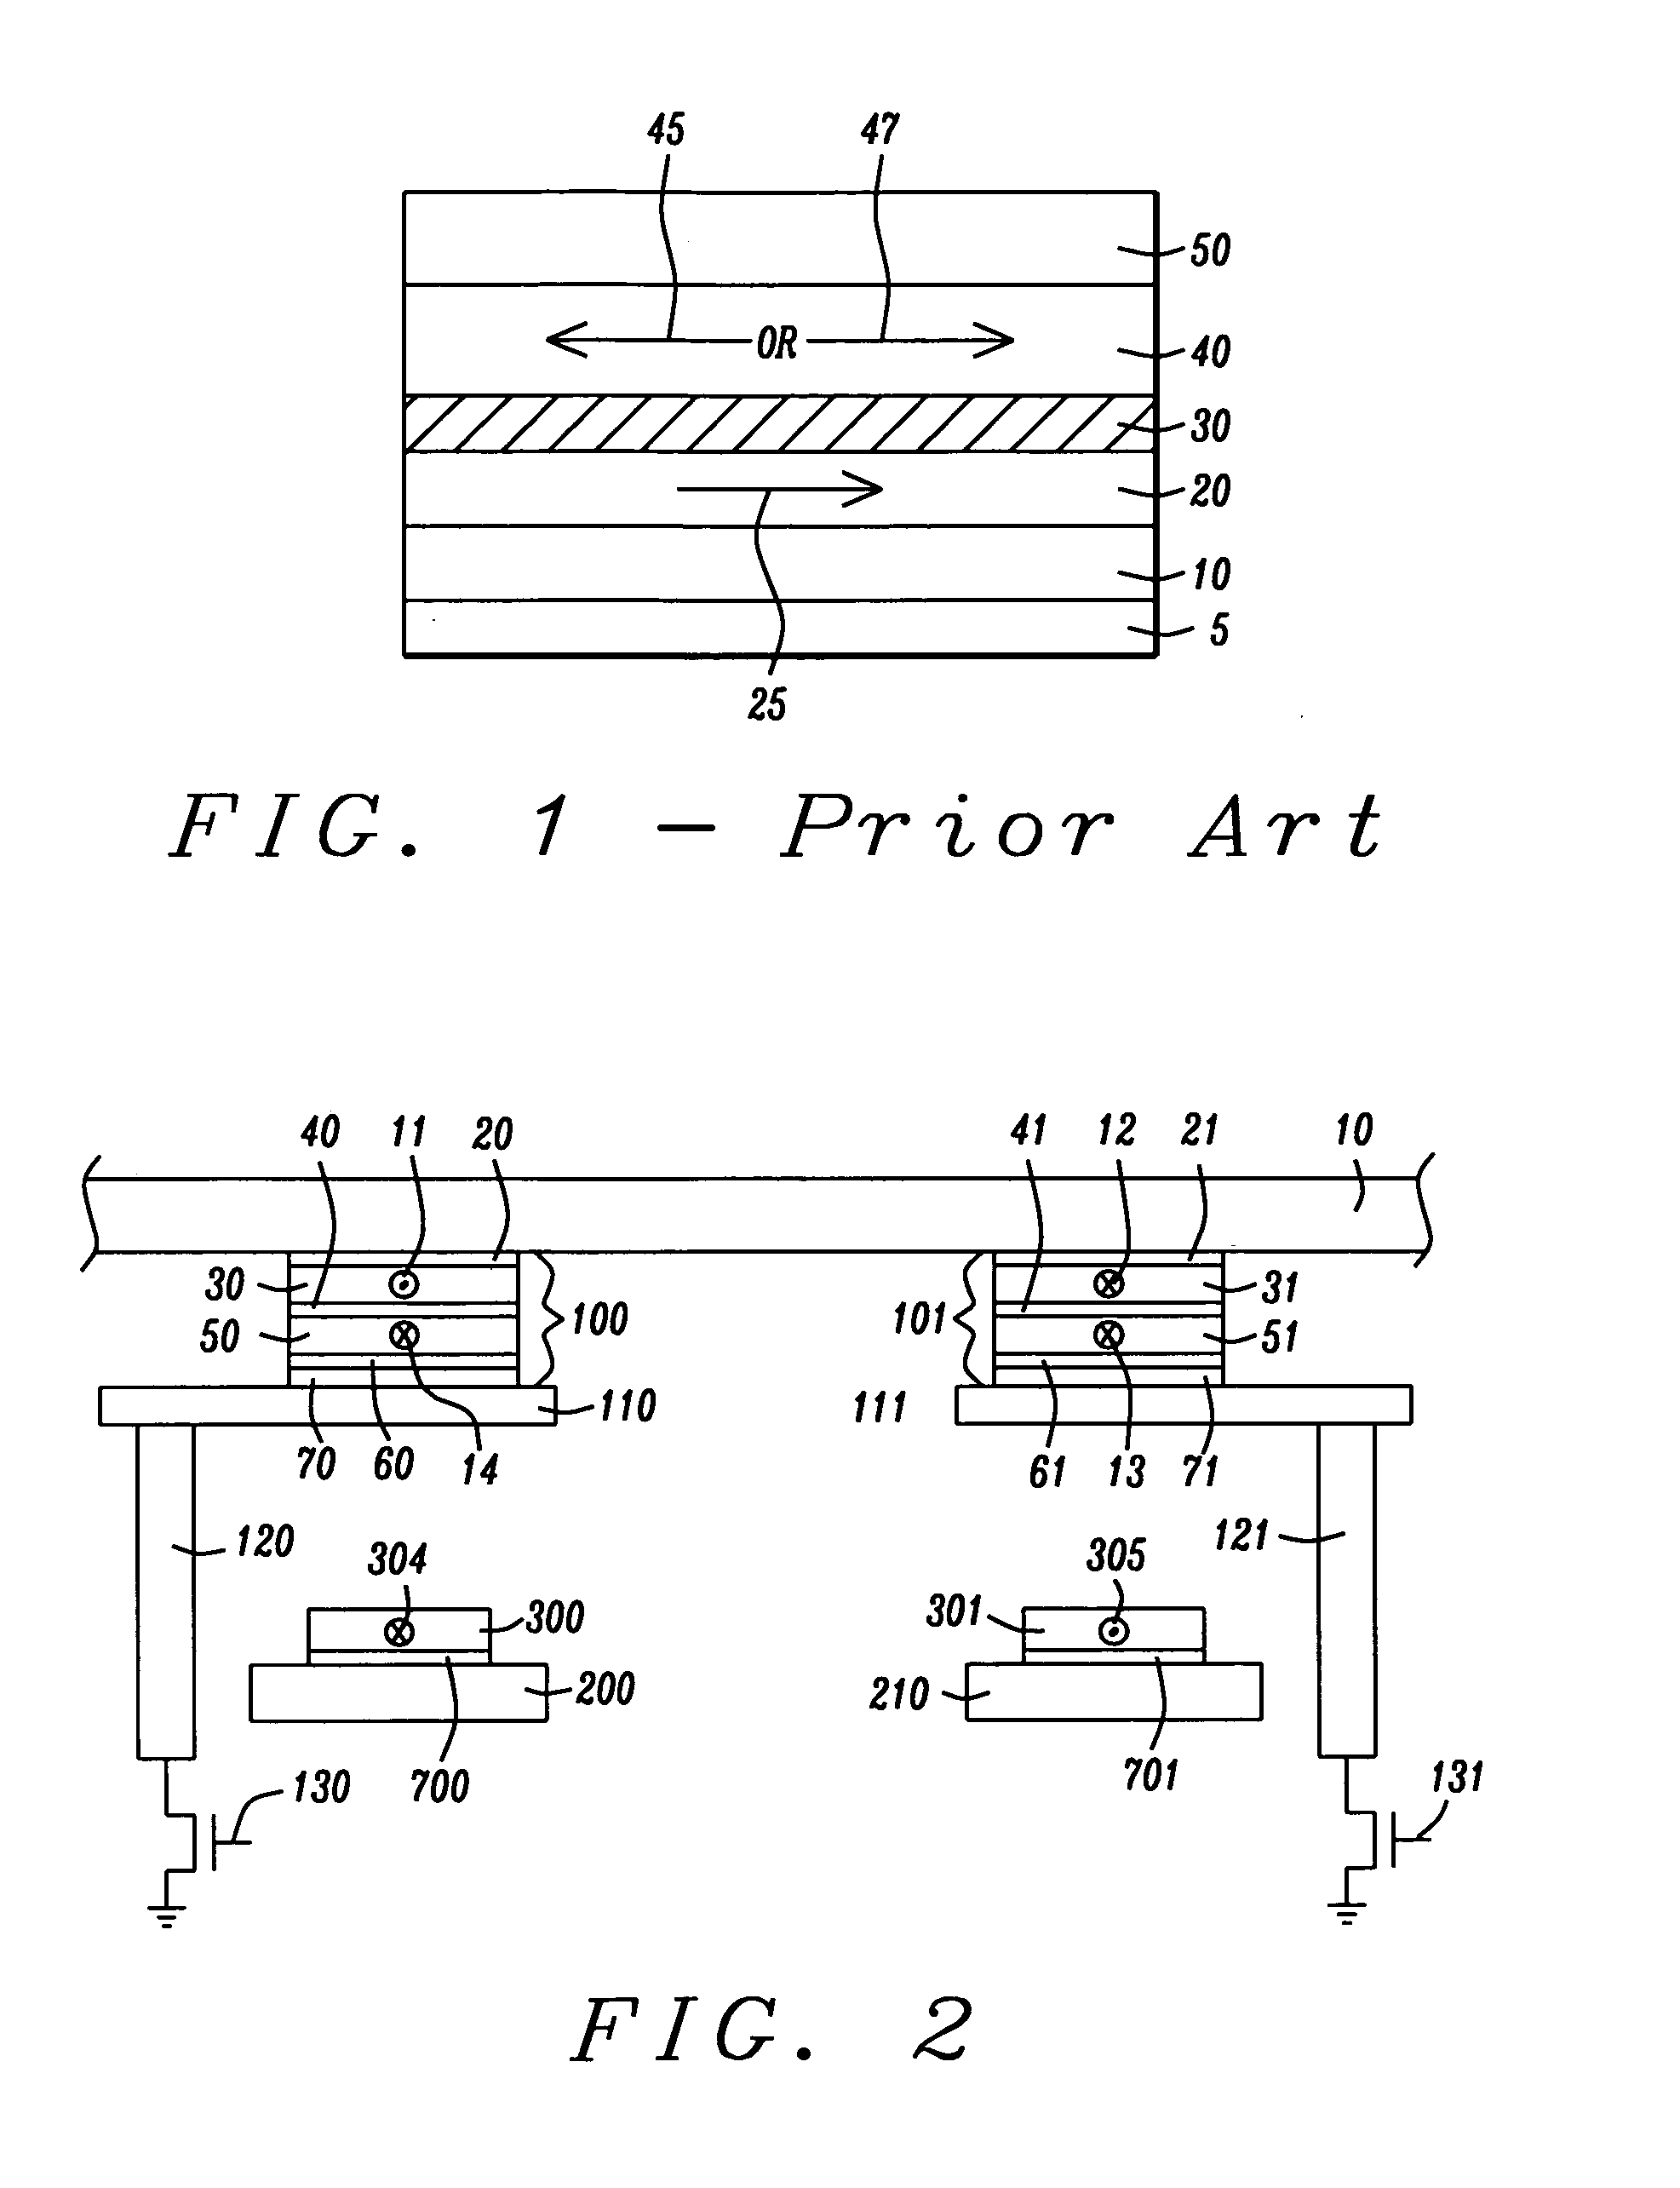 MRAM with split read-write cell structures